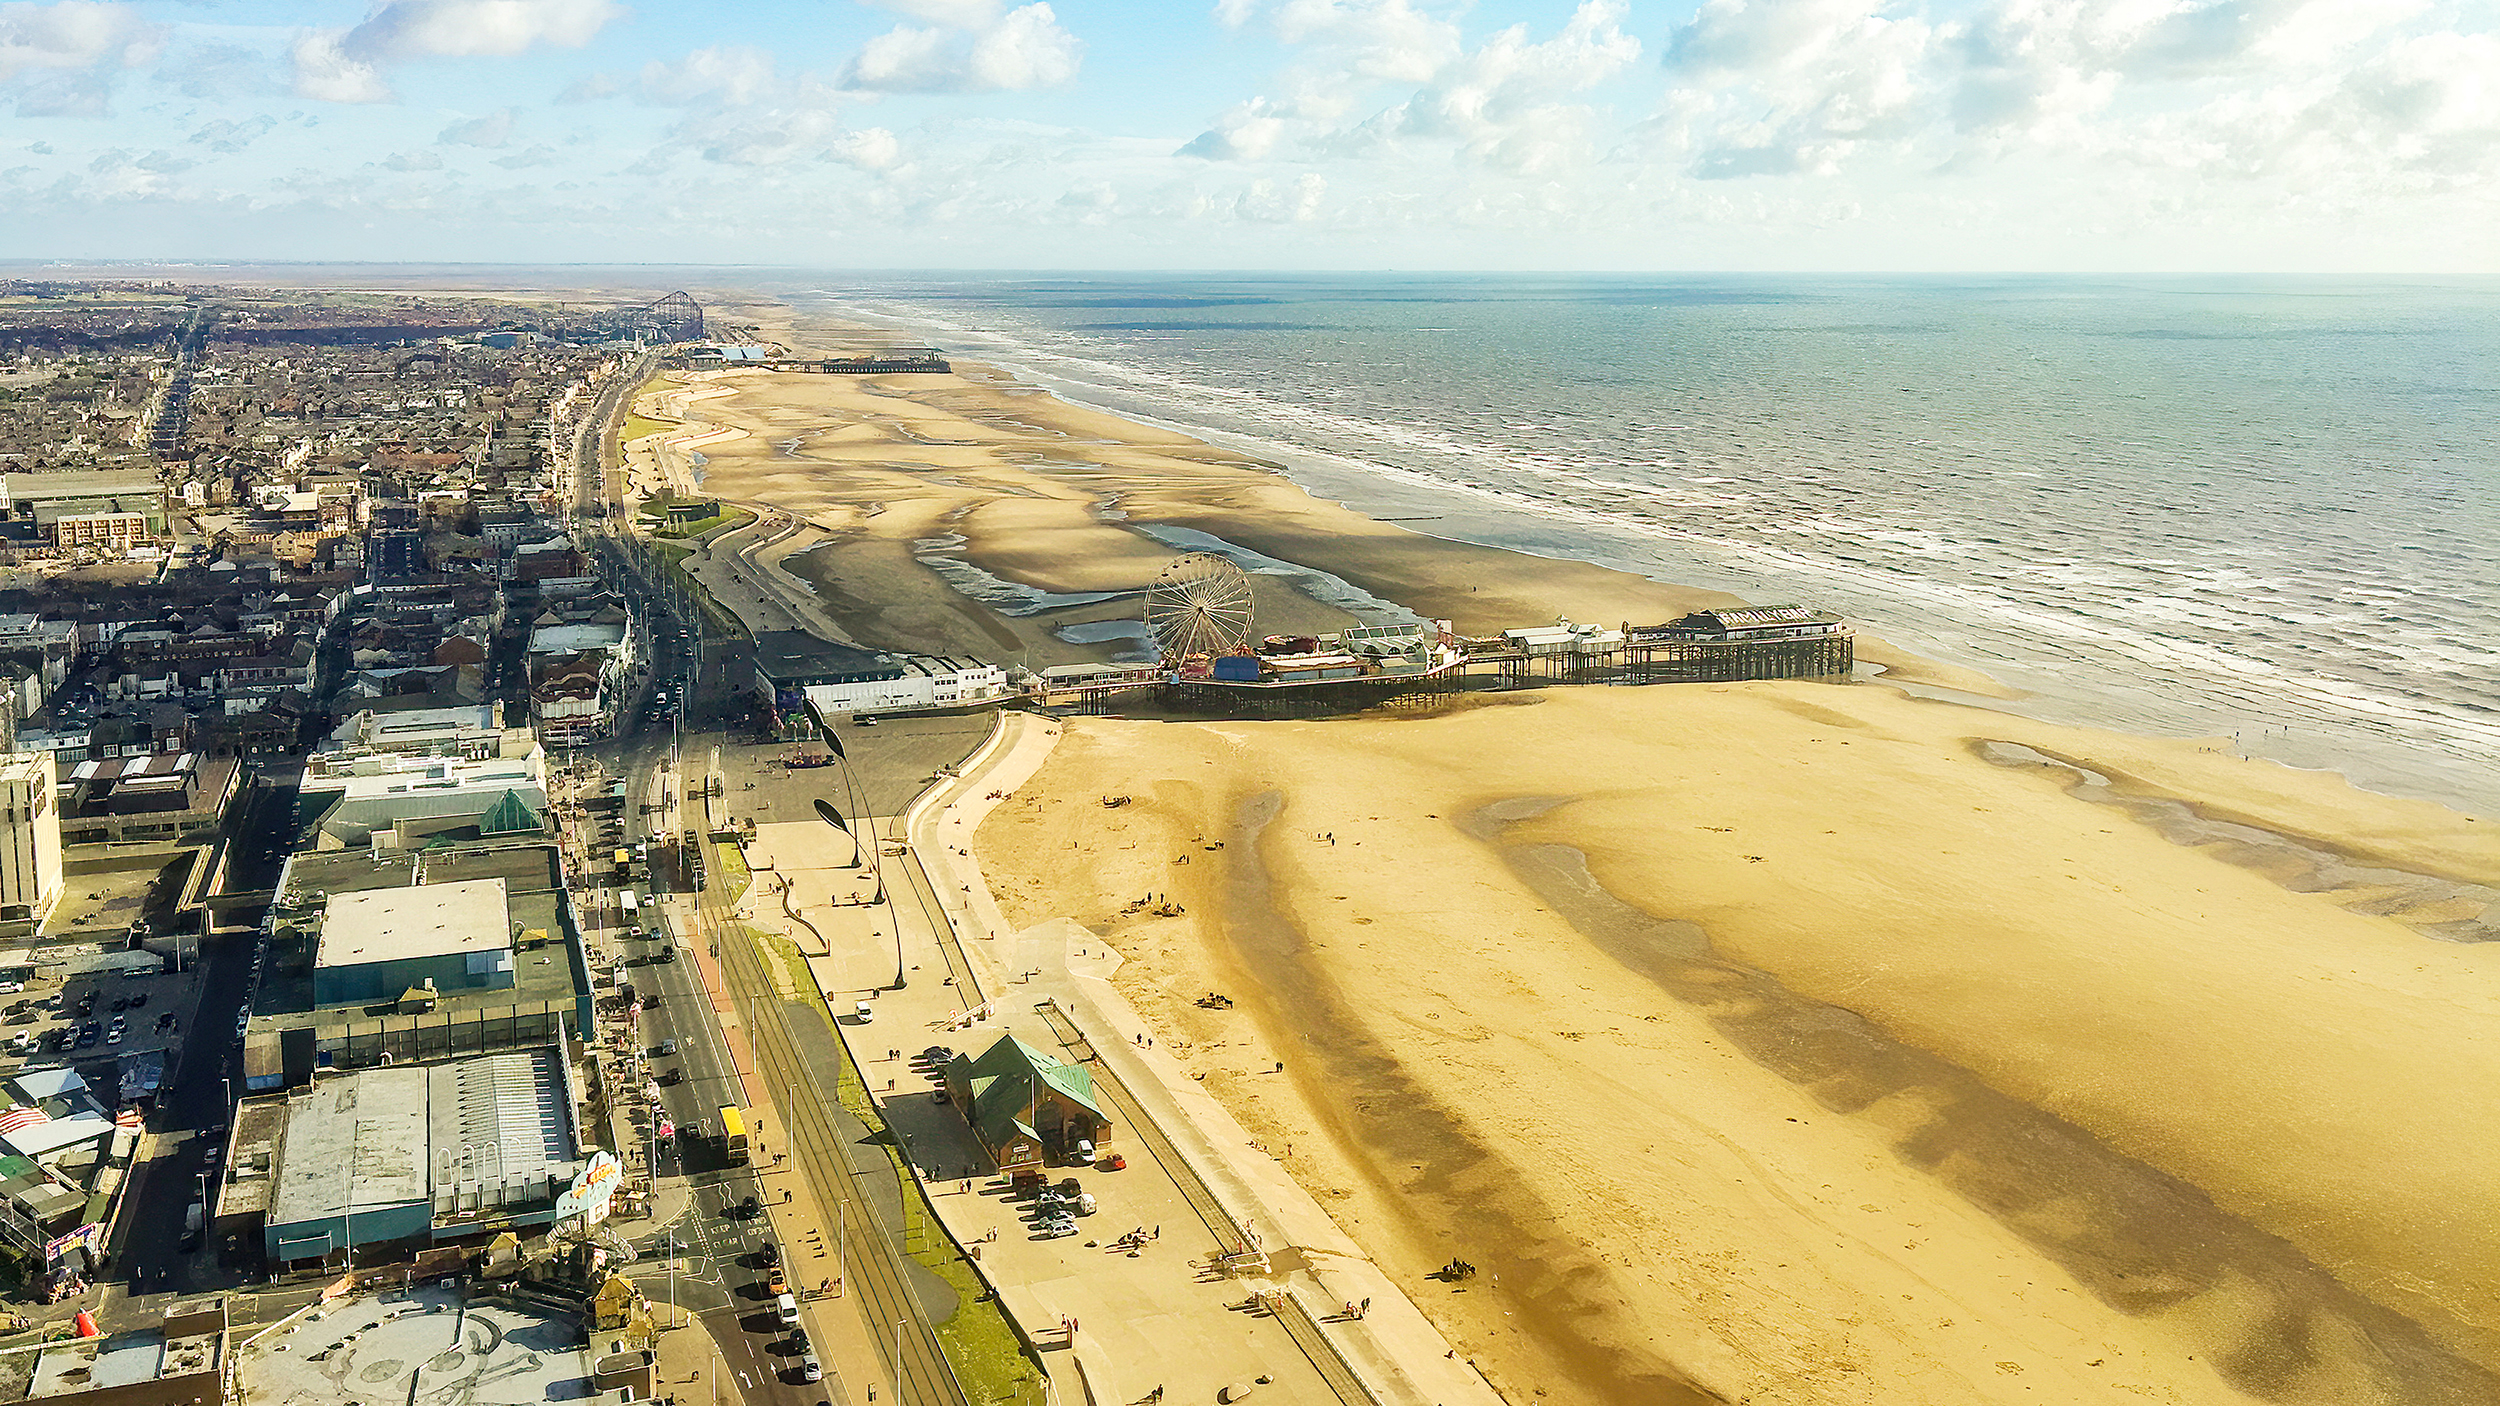 Iconic places UK Blackpool central pier viewed from Blackpool tower England United Kingdom Jul 2015 02